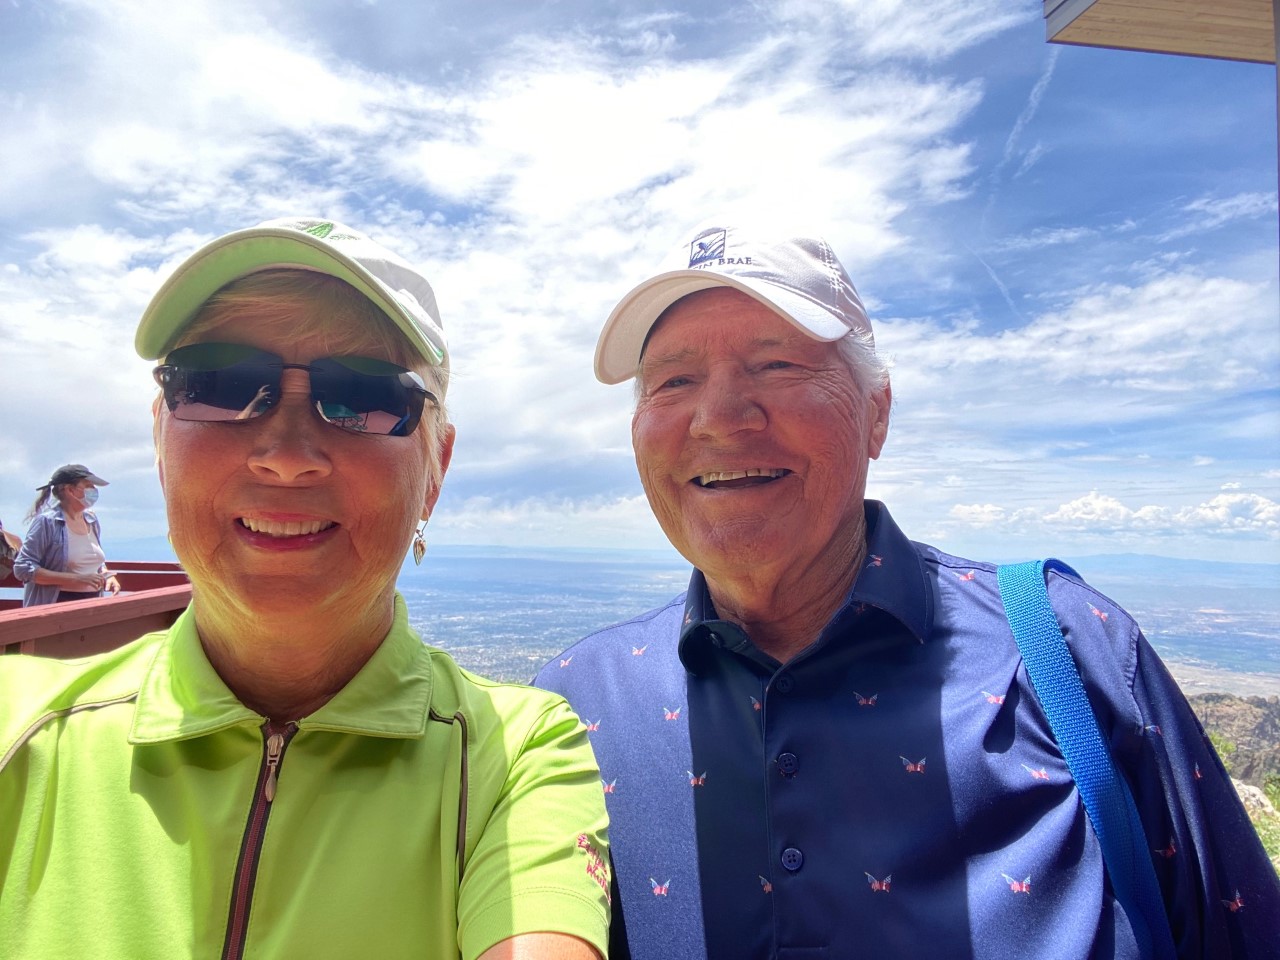 Our selfie at the Sandia Peak with view of Albuquerque in background